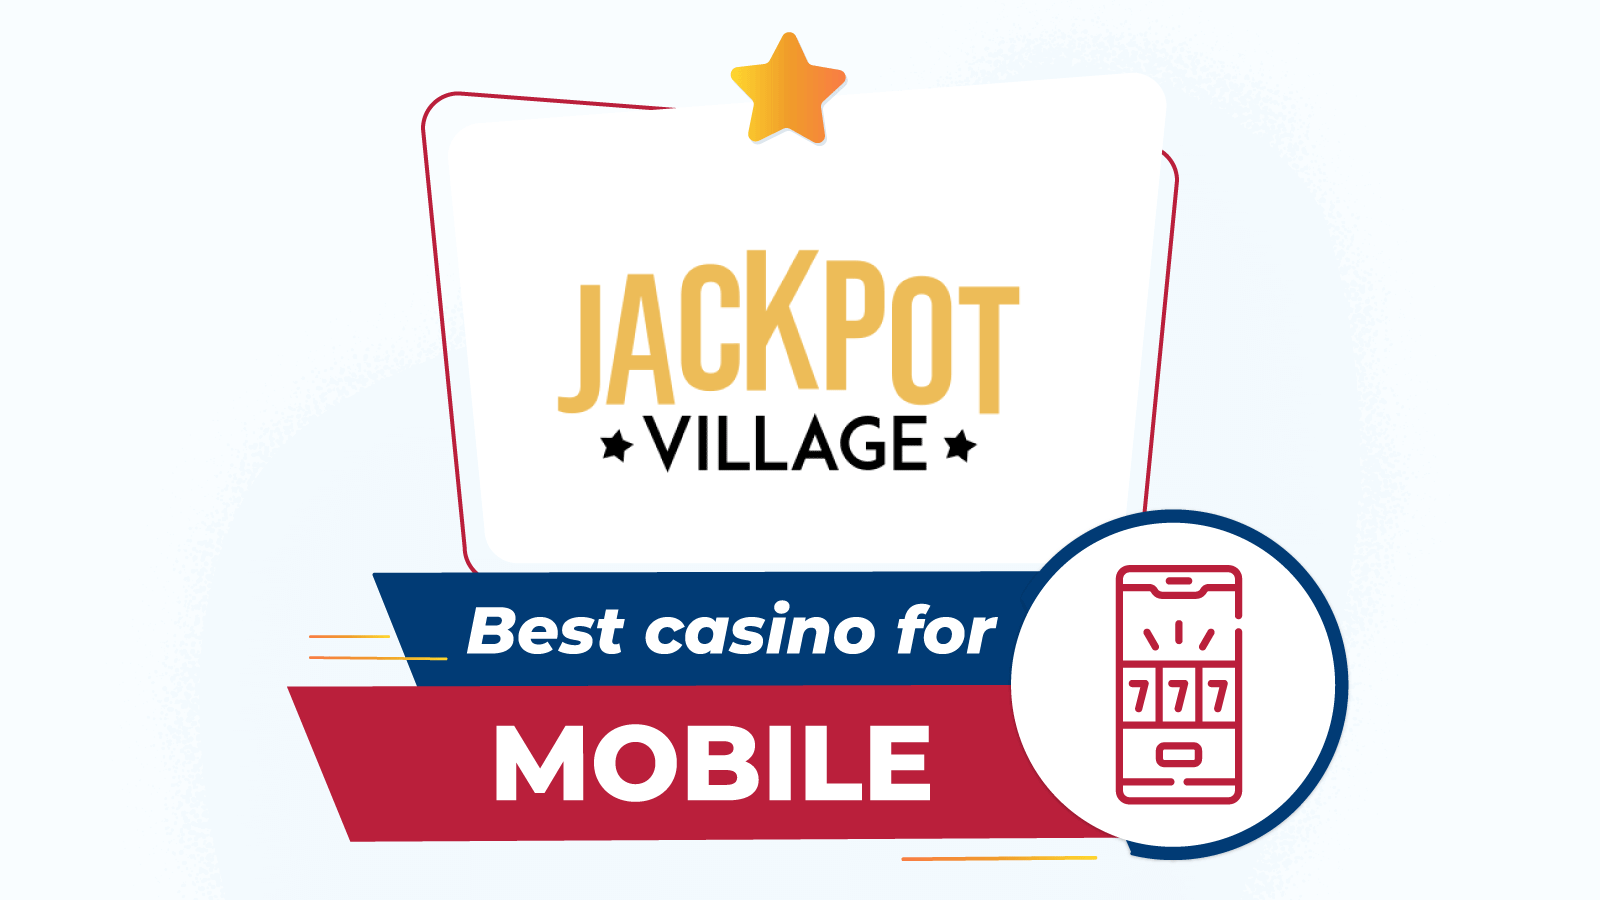 #1. Jackpot Village – Best Microgaming Casino for Mobile